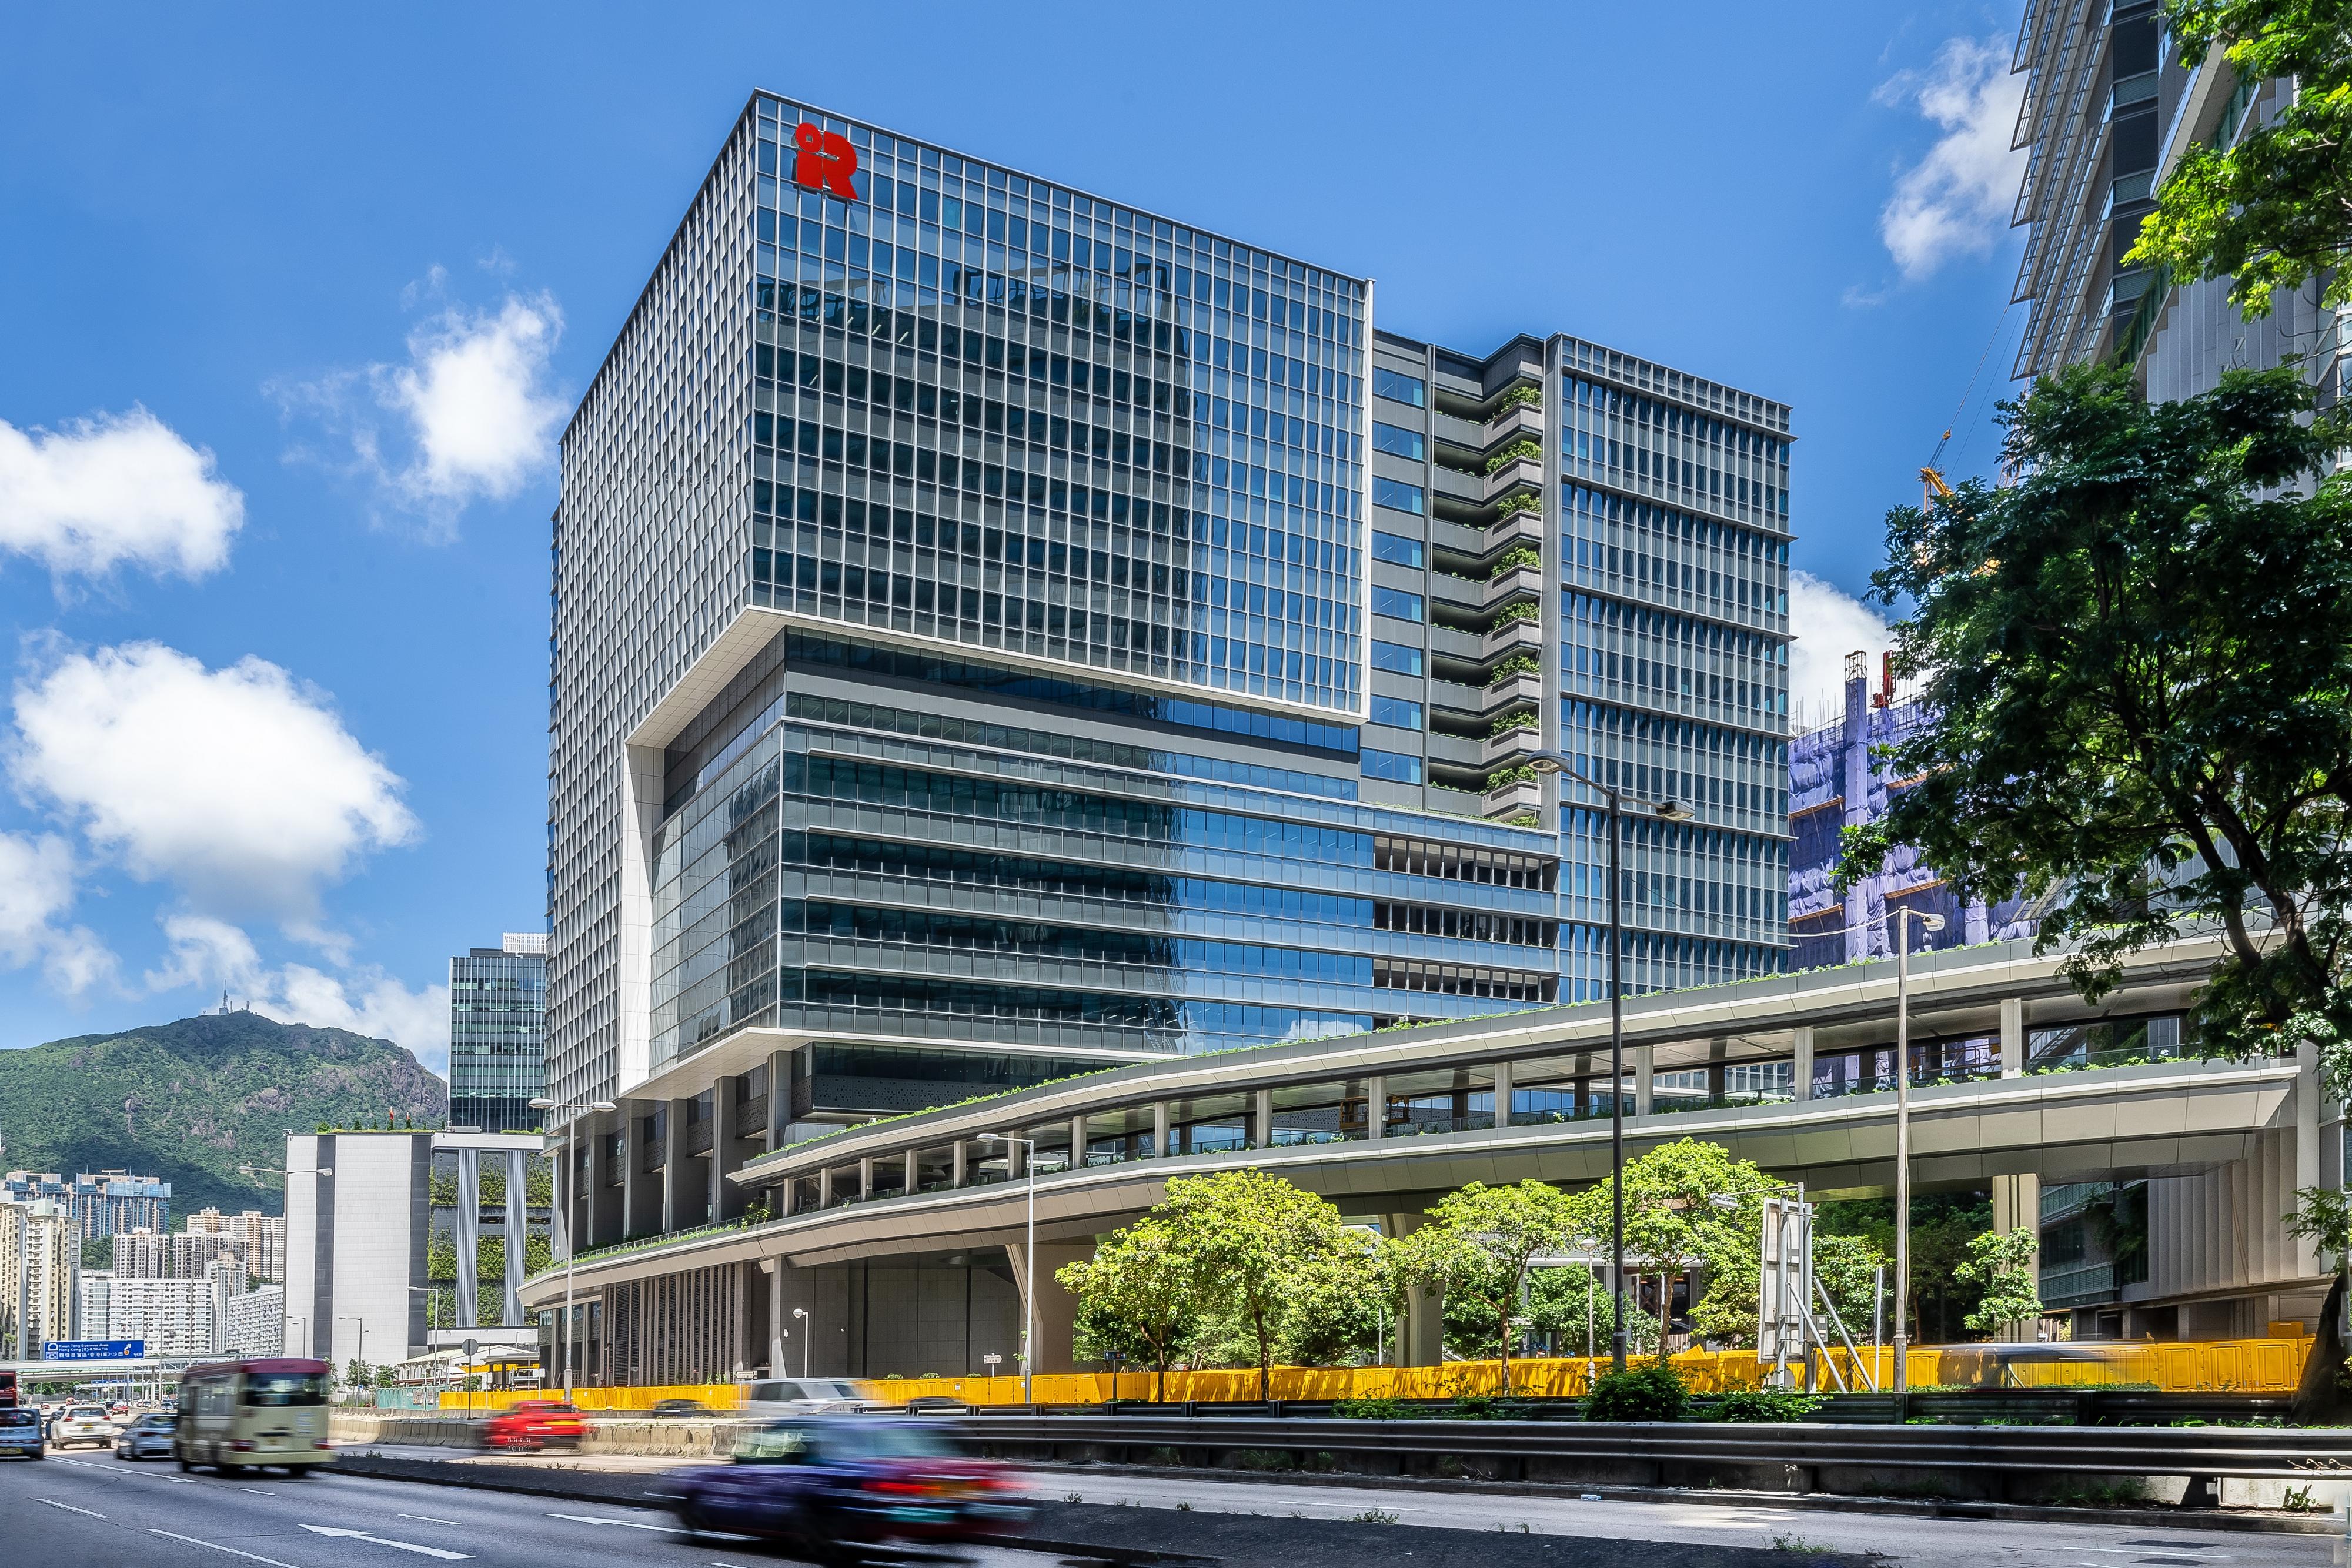 The offices of the Inland Revenue Department, currently located at the Revenue Tower, Wan Chai, will be relocated to the newly built Inland Revenue Centre at 5 Concorde Road, Kai Tak, Kowloon, by phases from next Monday (December 19) to May 2023.